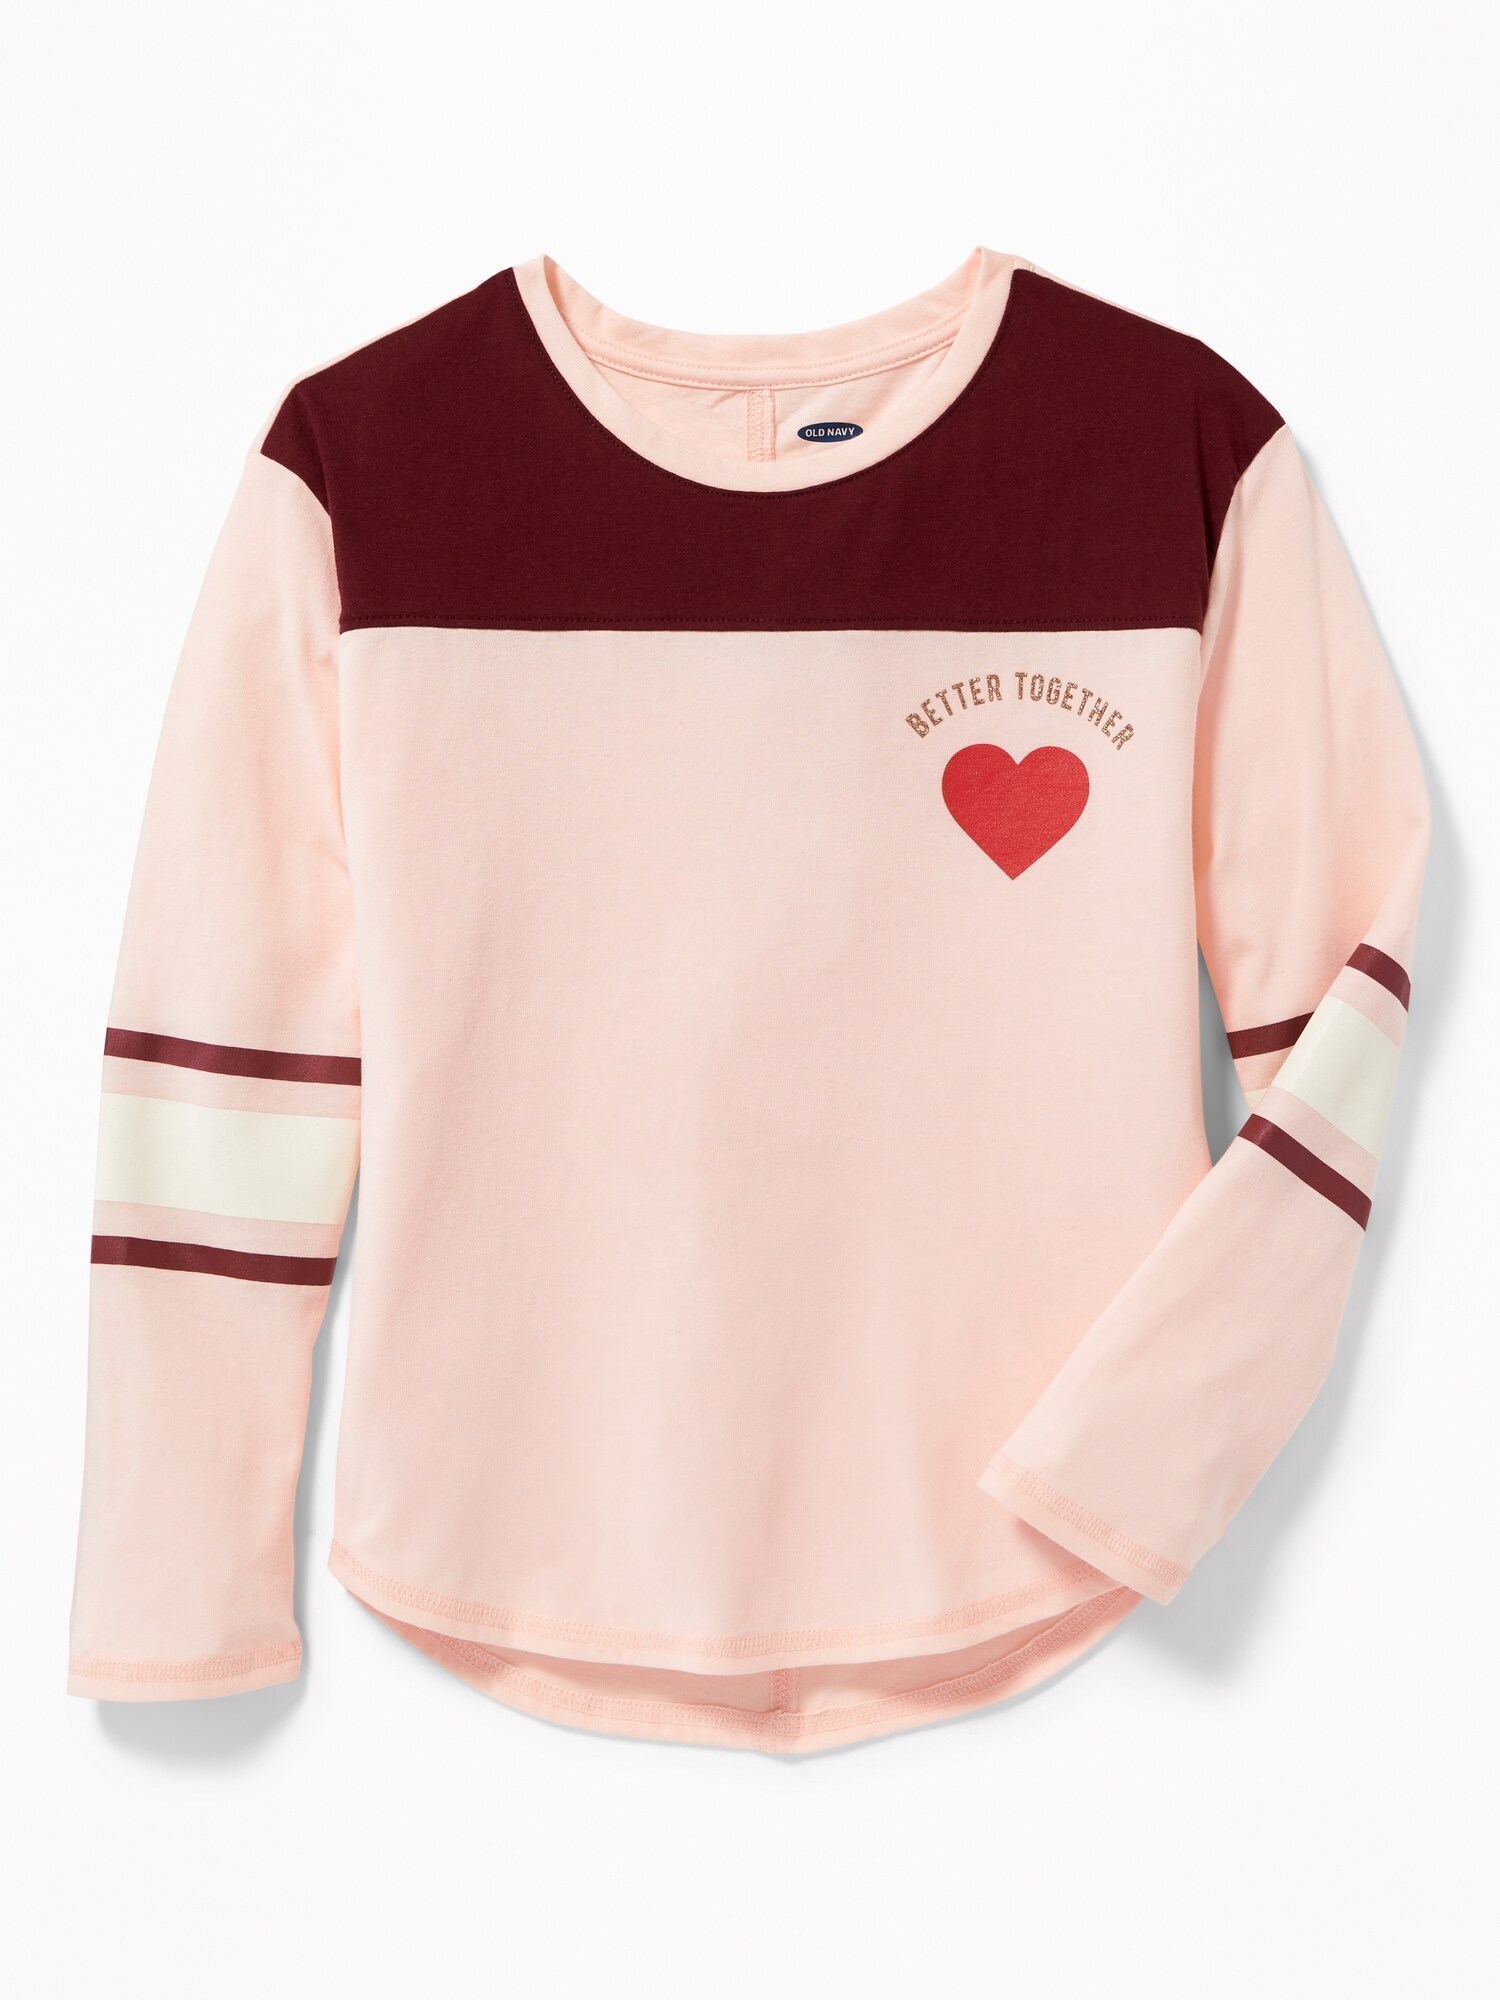 Graphic Football Tee for Girls | Old Navy